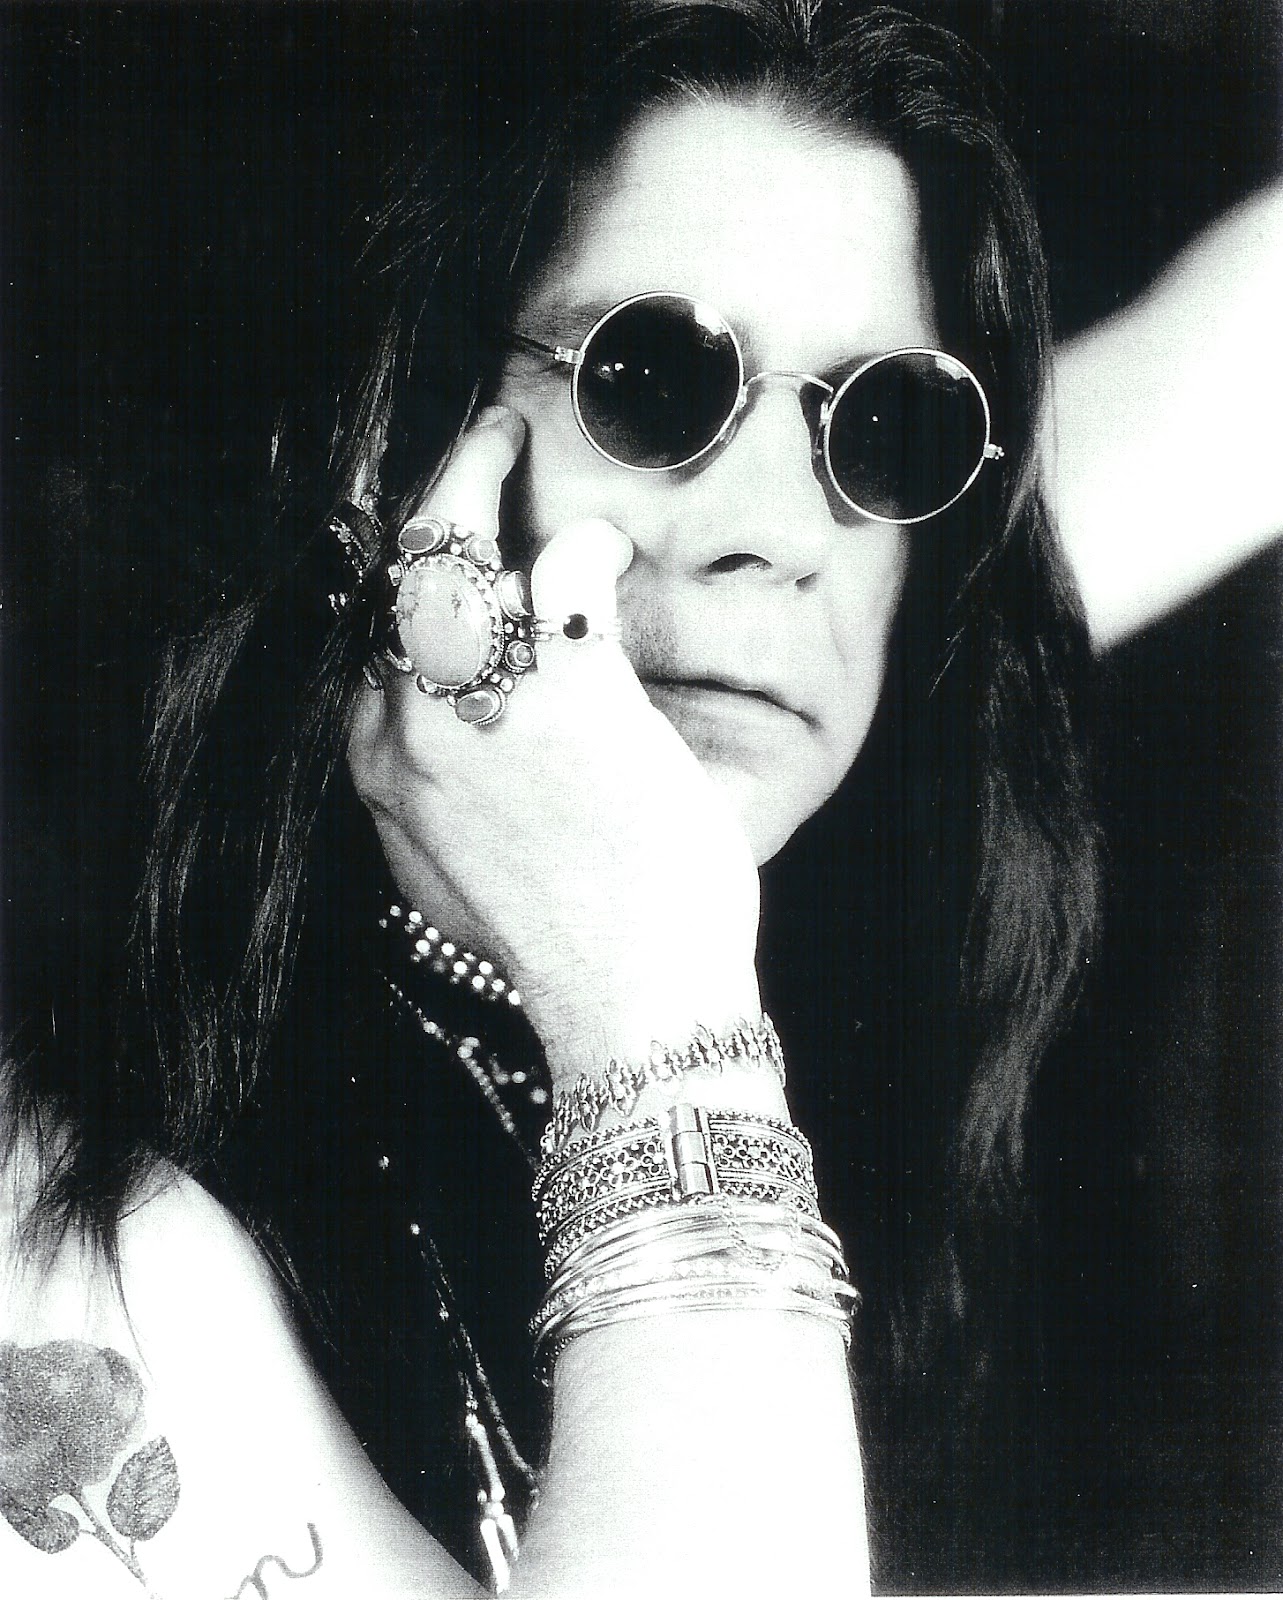 ozzy discography wikipedia